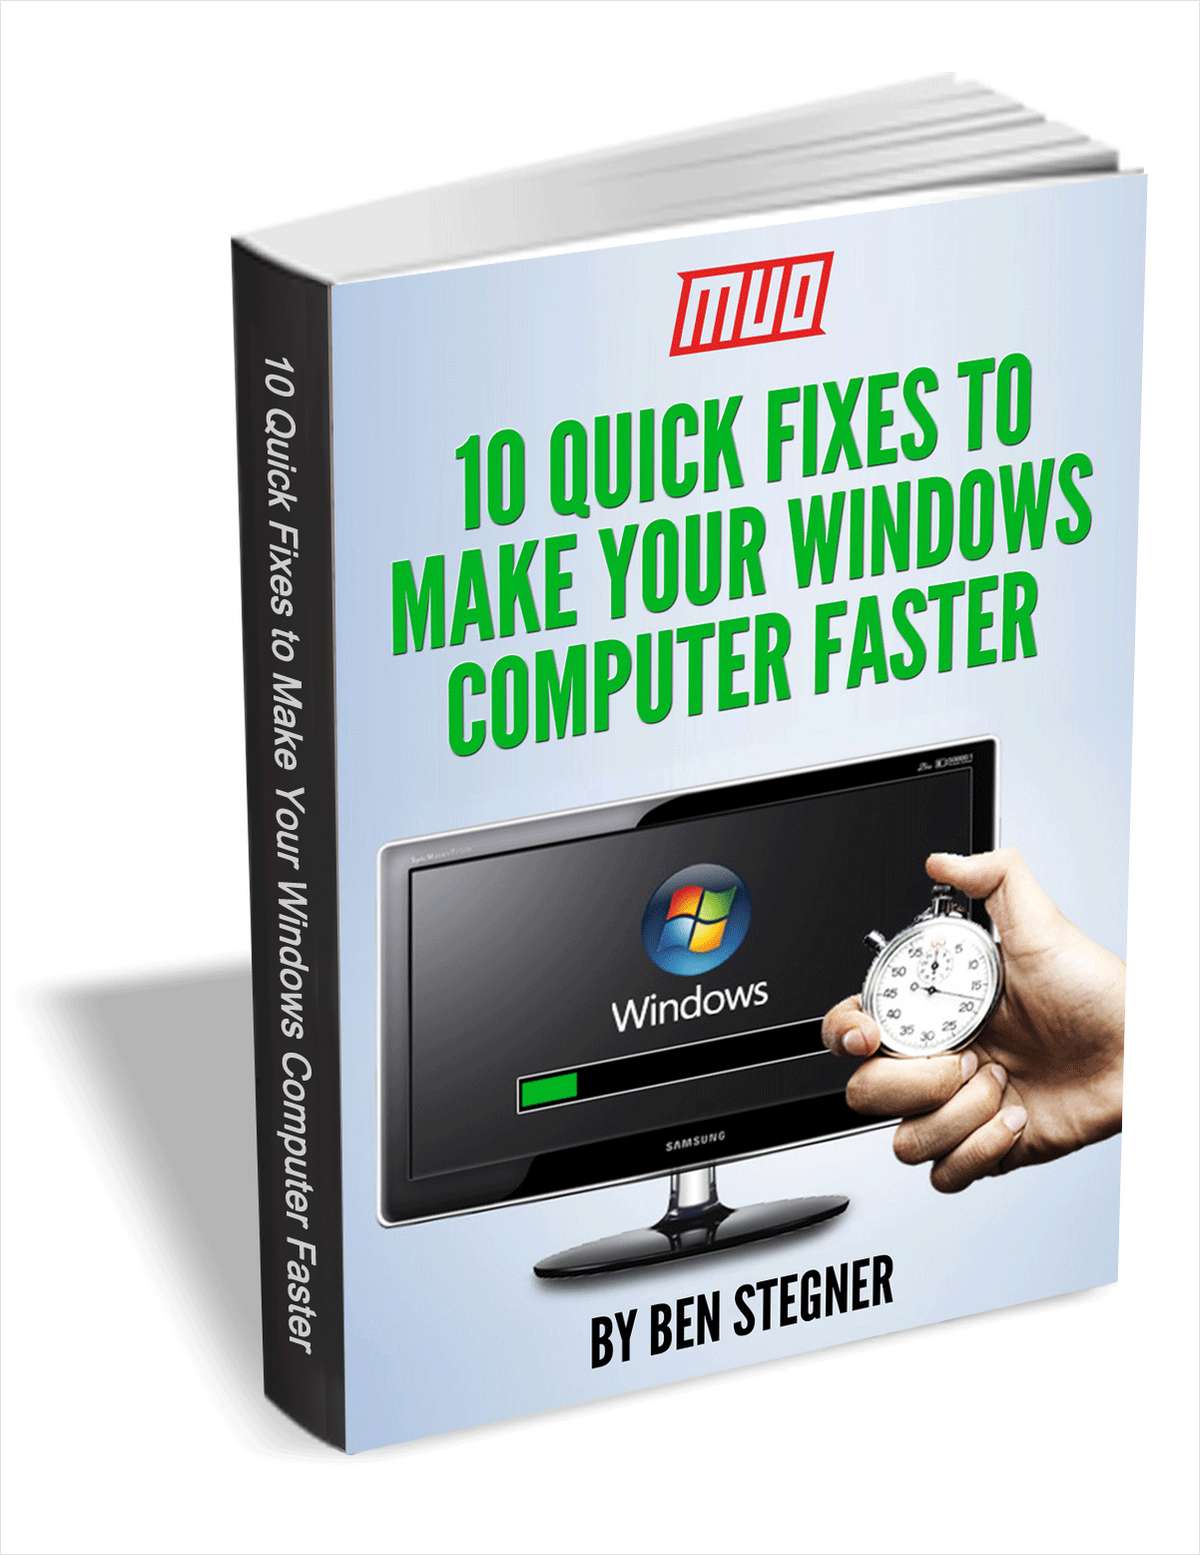 10 Quick Fixes to Make Your Windows Computer Faster (100% discount) | SharewareOnSale